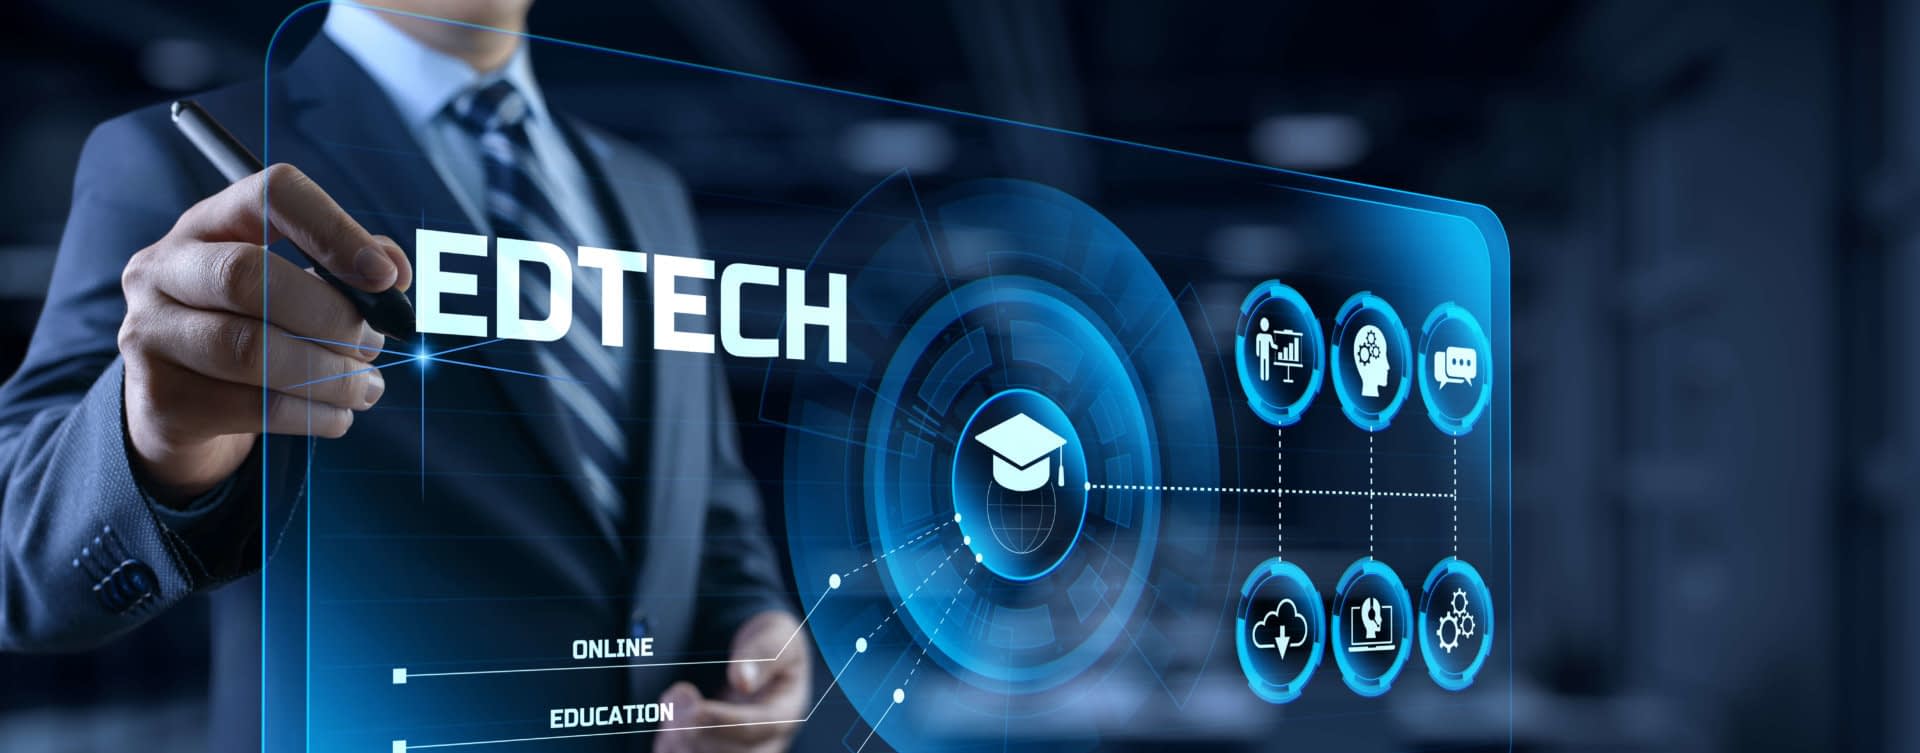 Essential Marketing Tips for Ed-Tech Companies